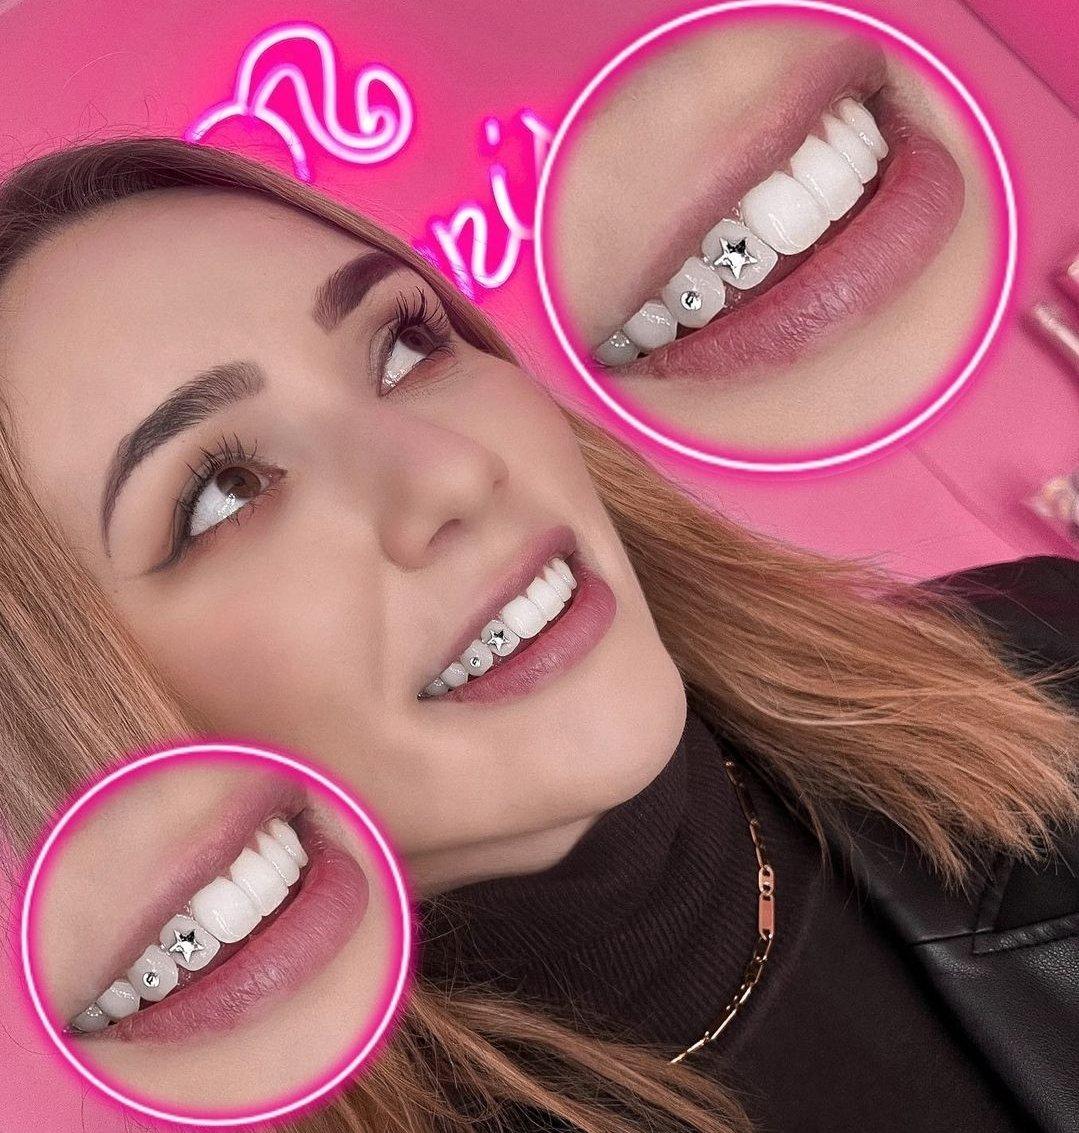 Tooth Gems' Is The New Hot Beauty Trend and I Don't Hate Them